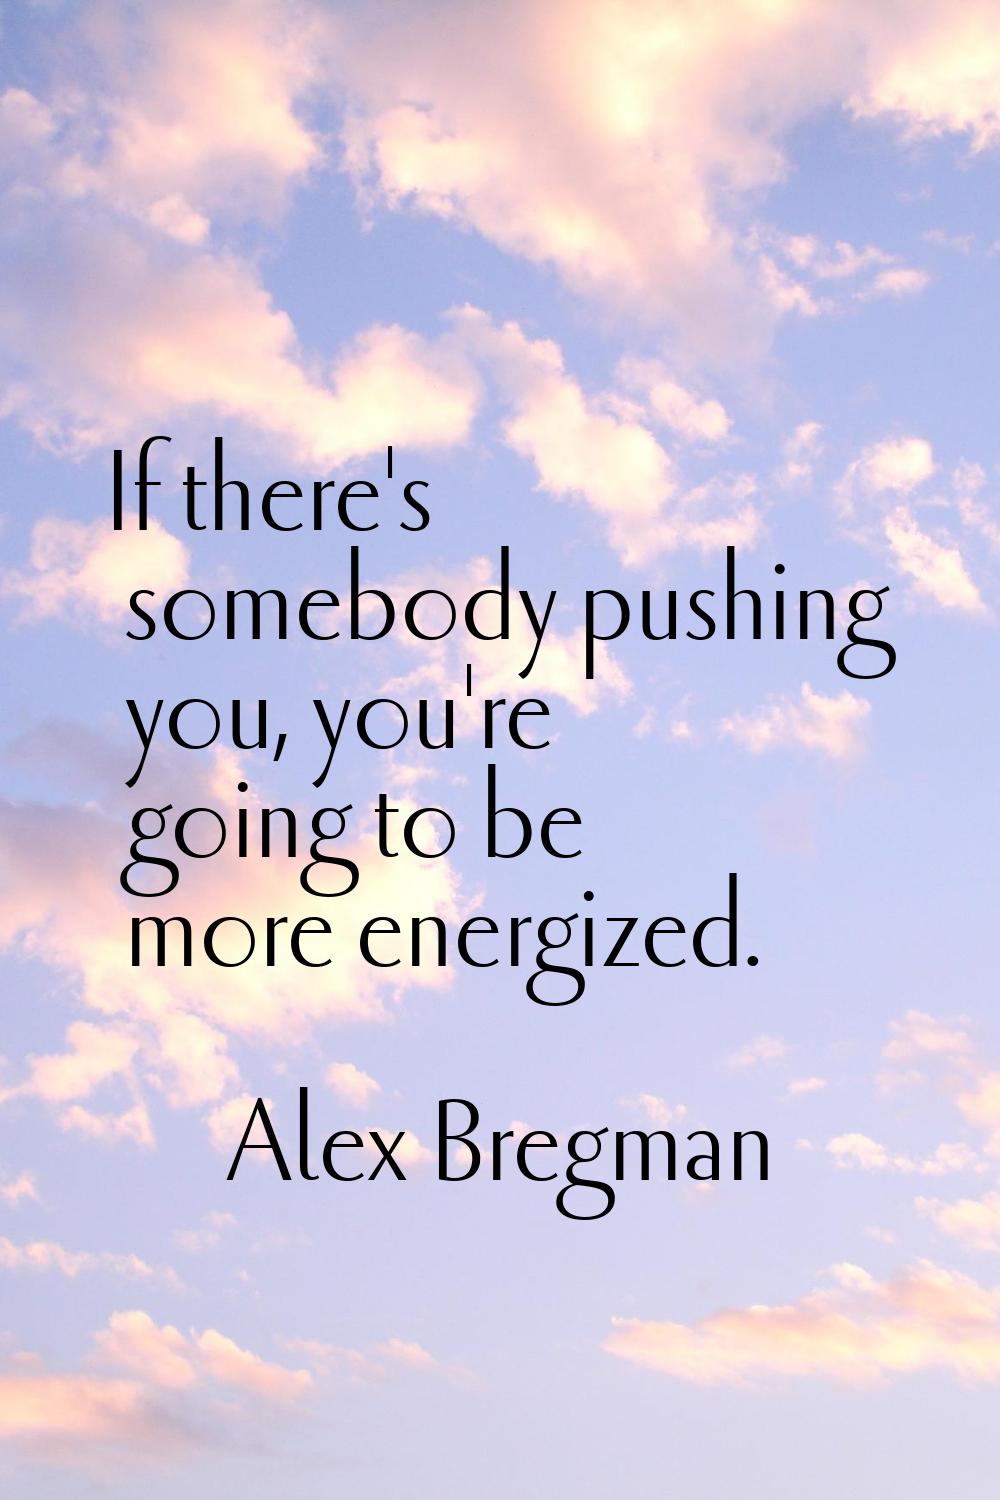 If there's somebody pushing you, you're going to be more energized.